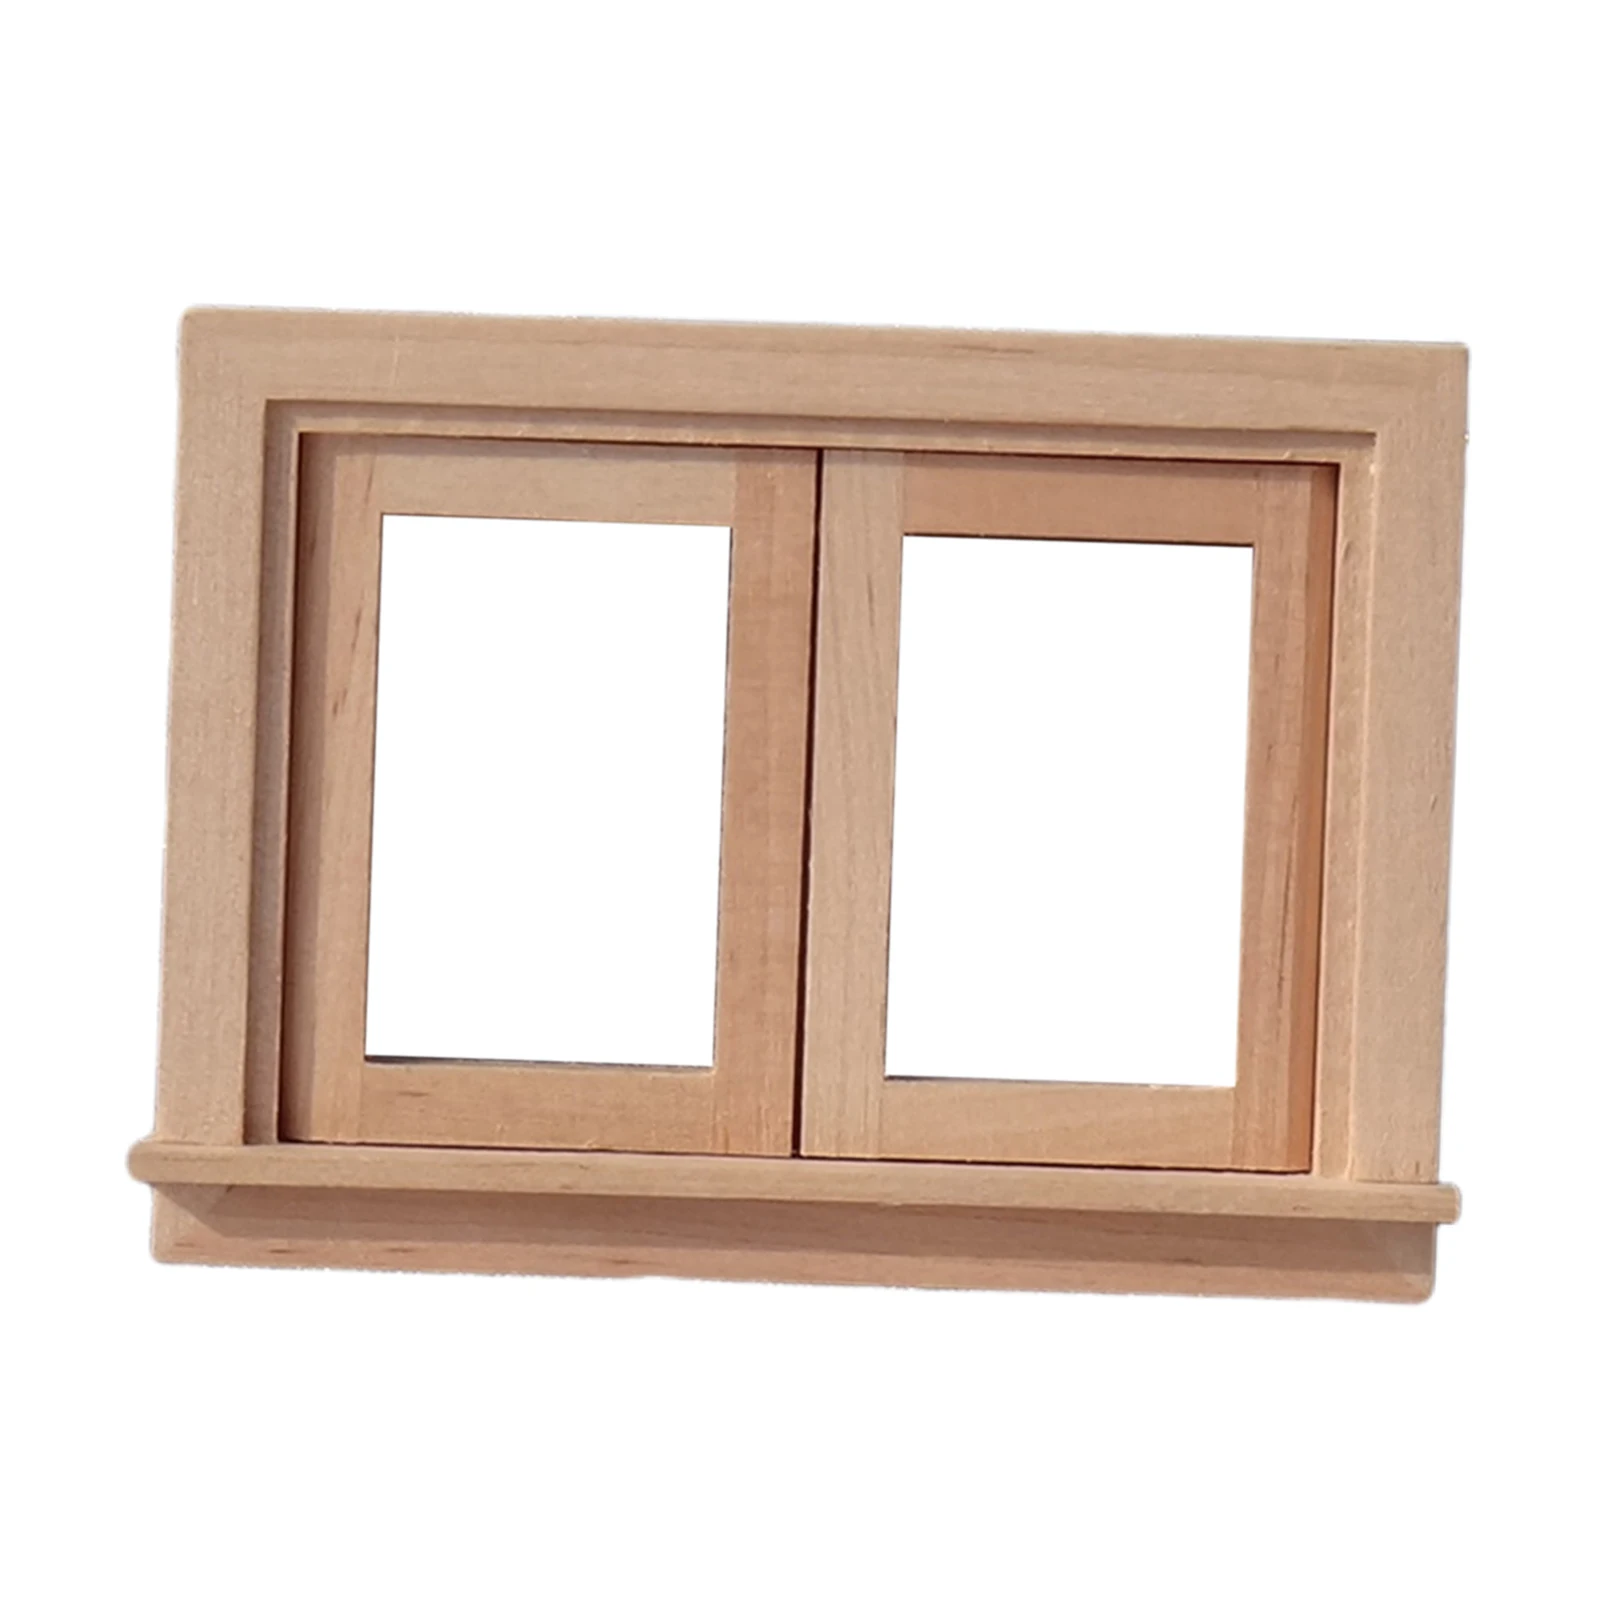 12th Window Frames for Dollhouse Room House Accessories Kids Pretend Toys